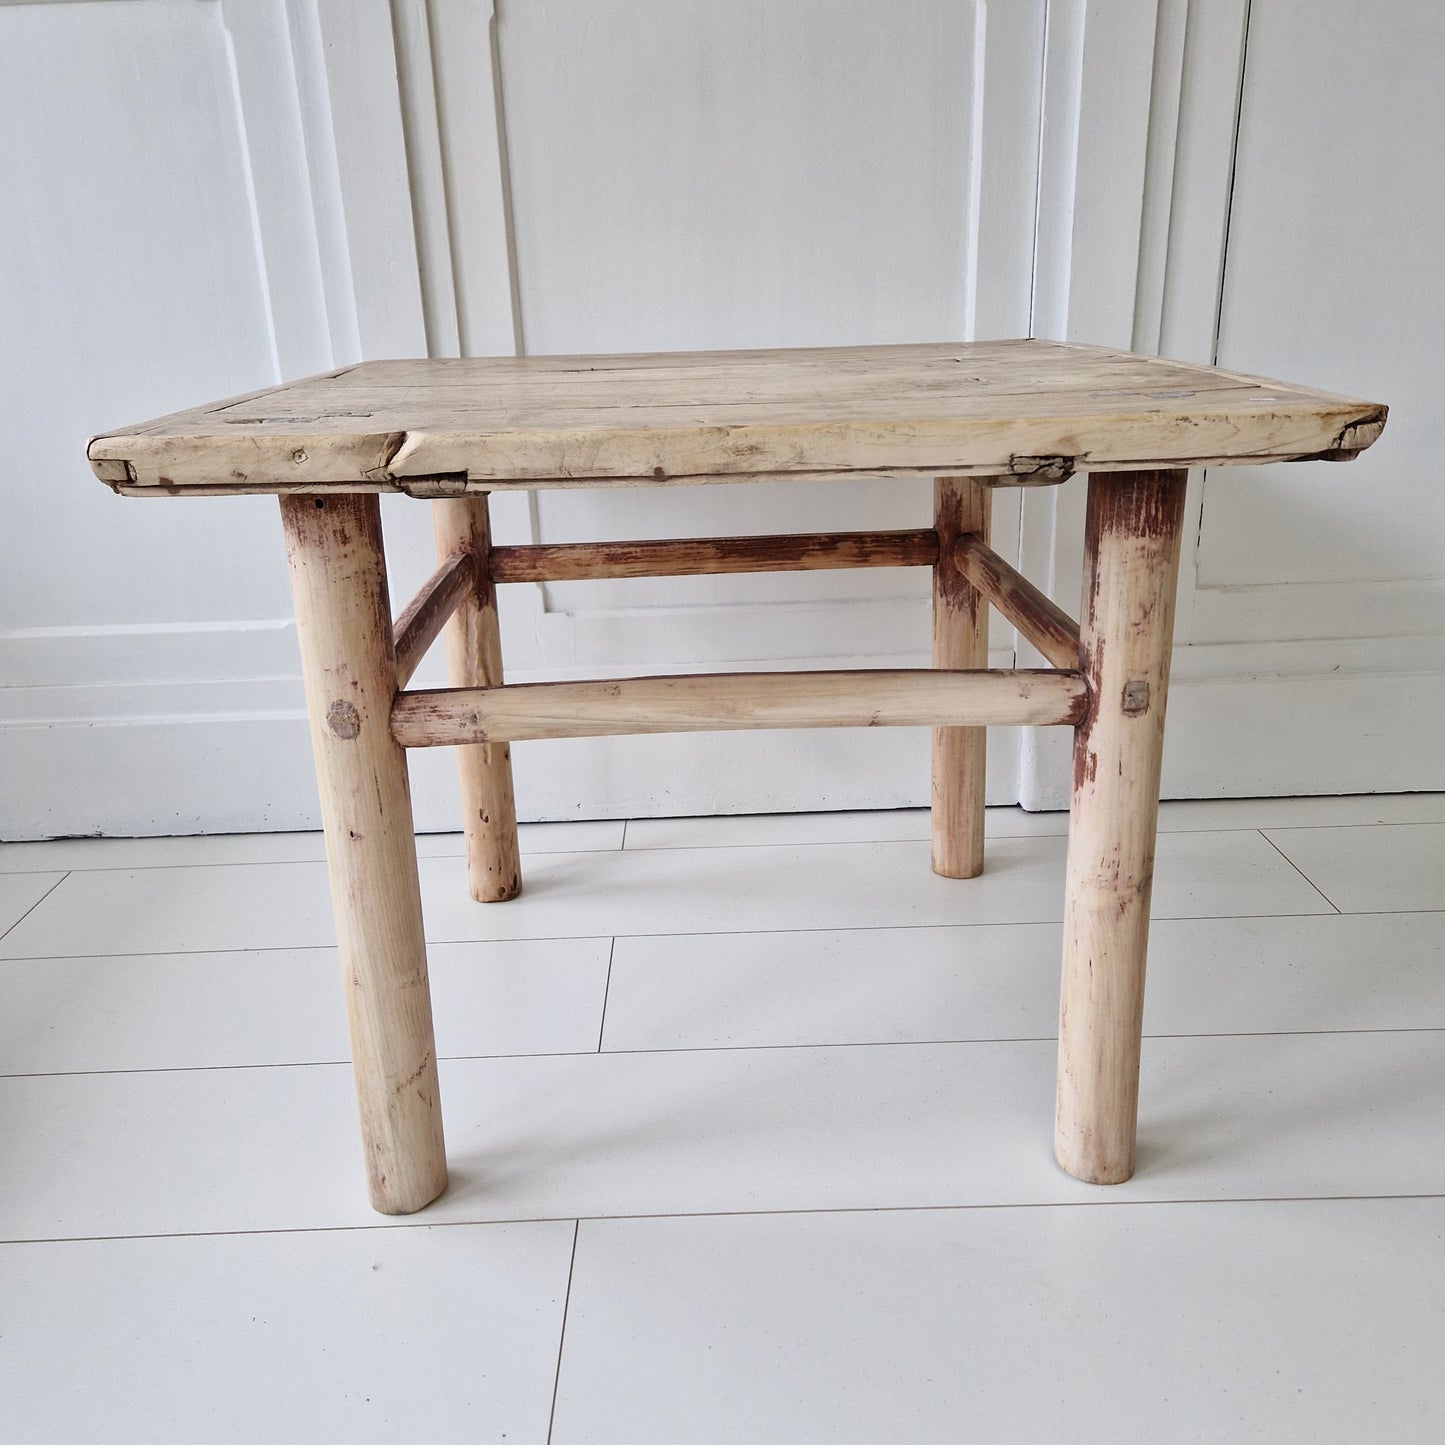 Chinese old wooden table No. 6 (65,5x64x52,5cm)